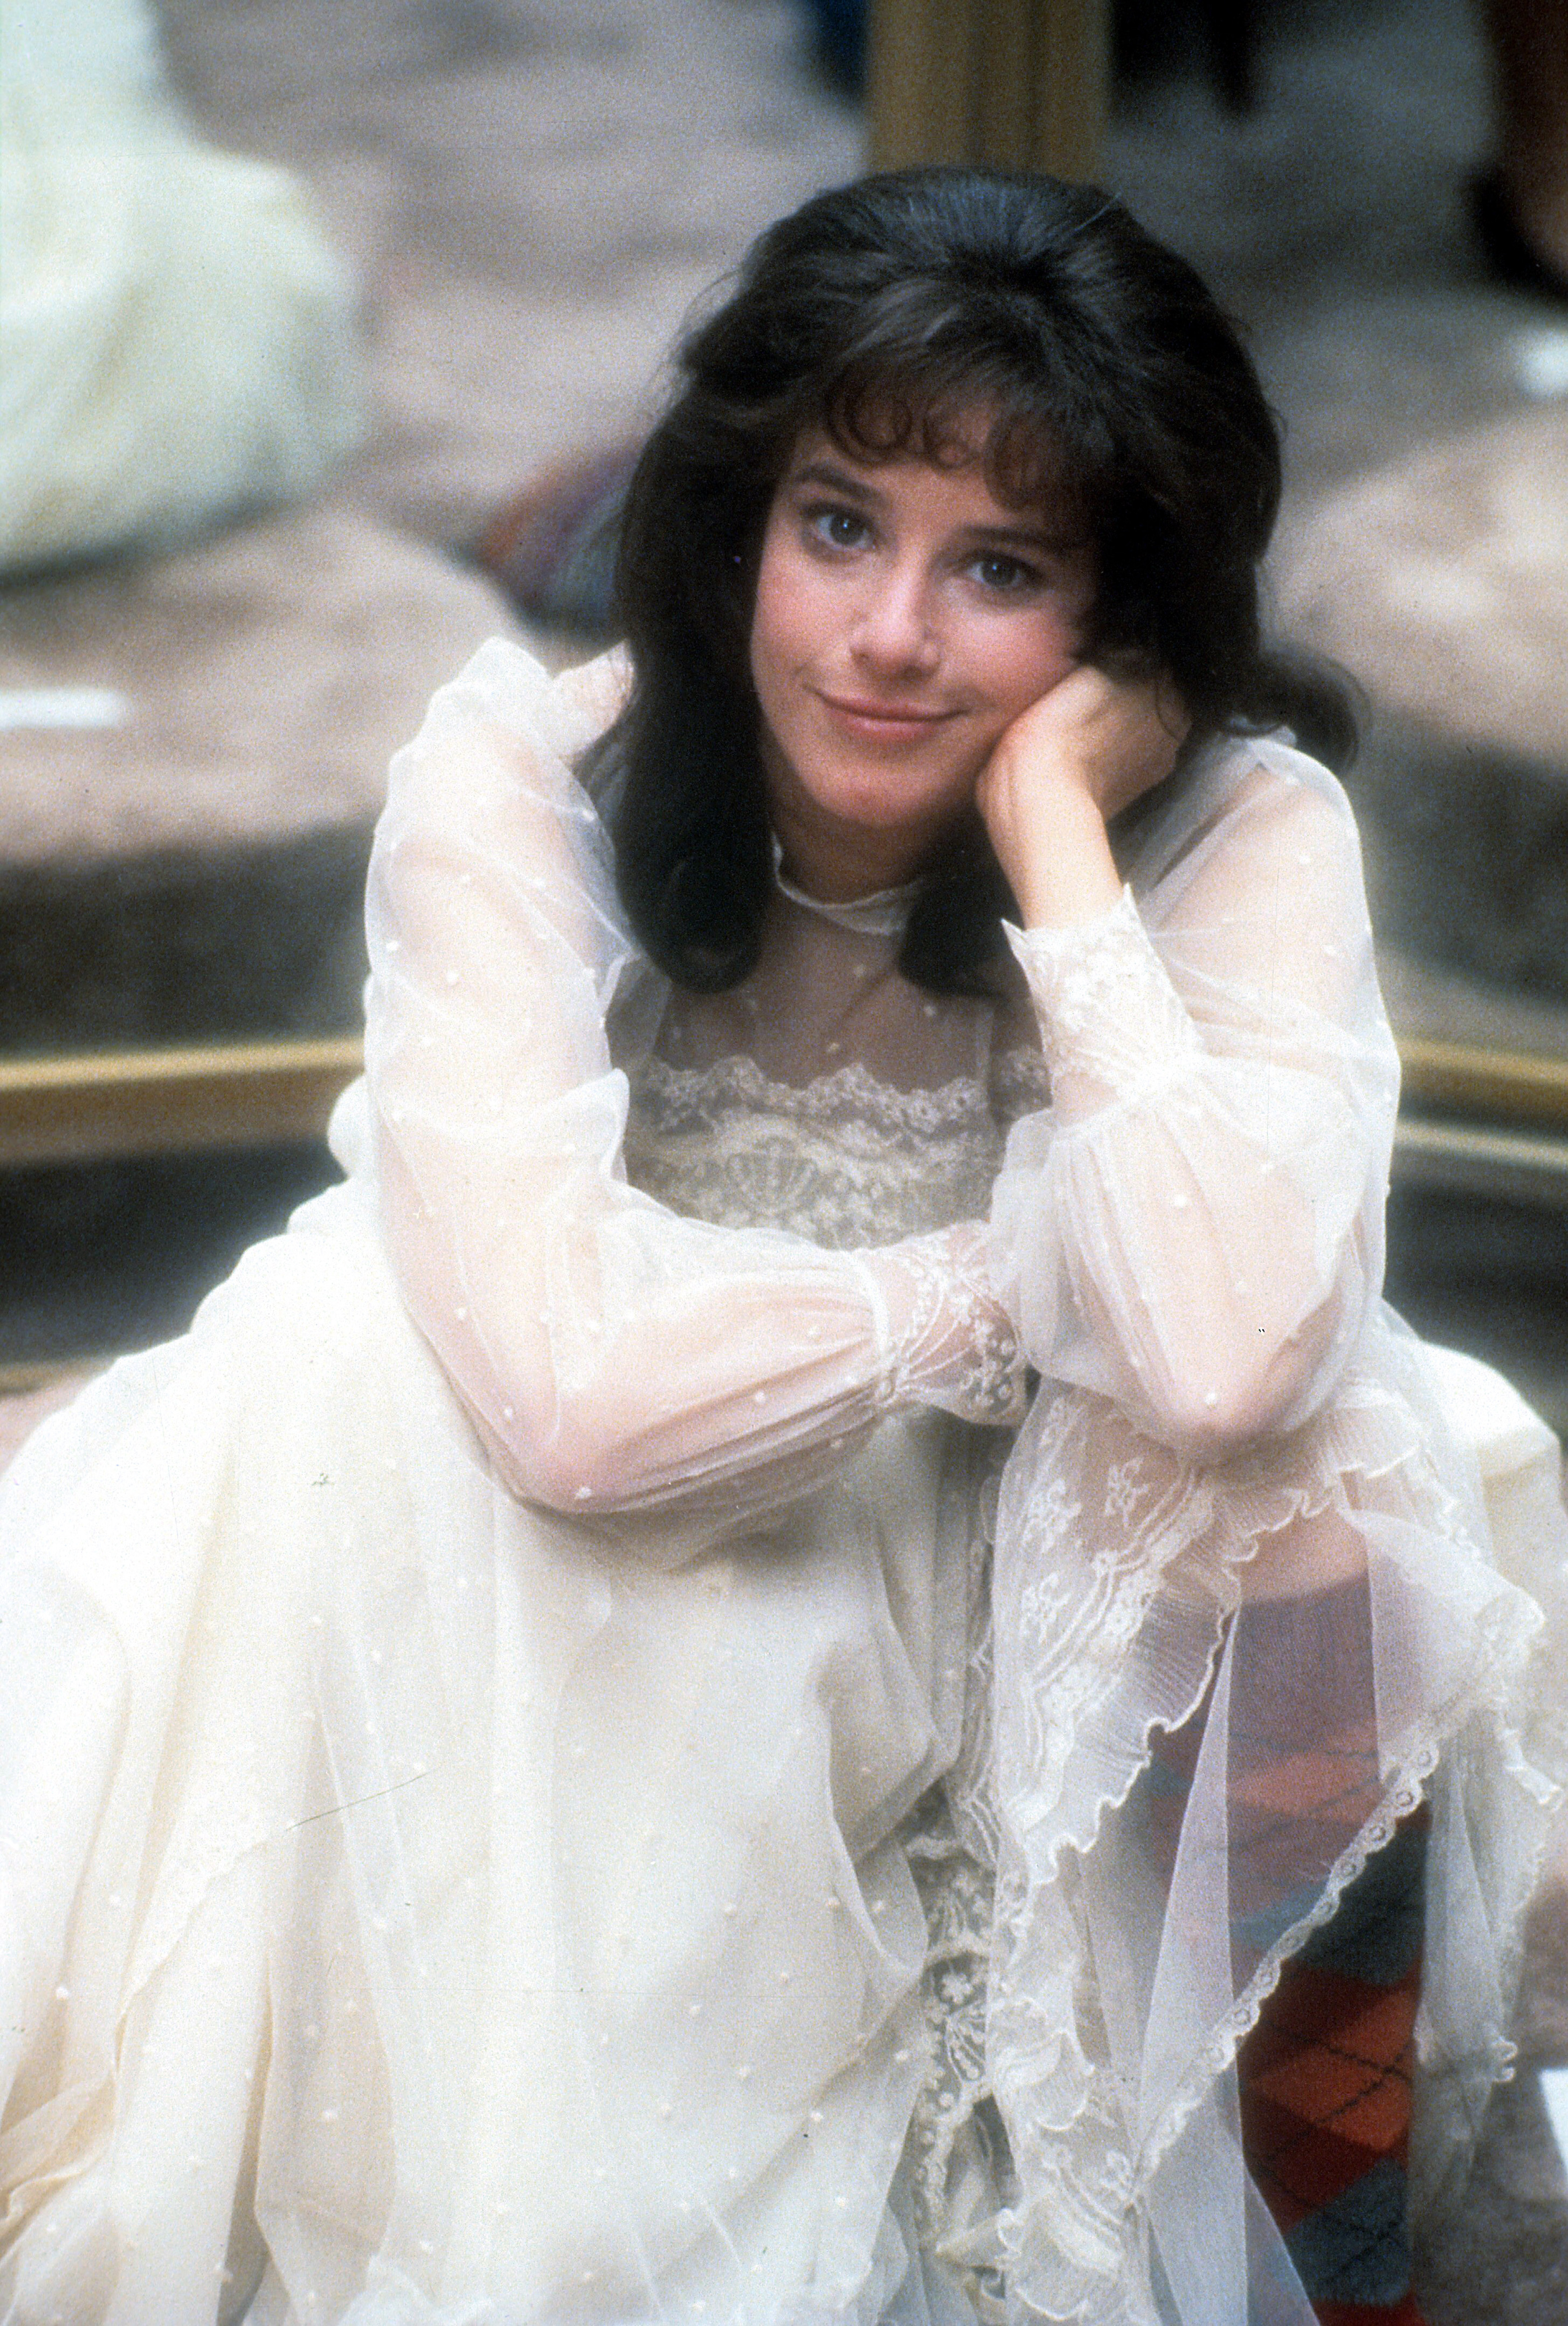 Debra Winger on the set of "Terms of Endearment," in 1983 | Source: Getty Images